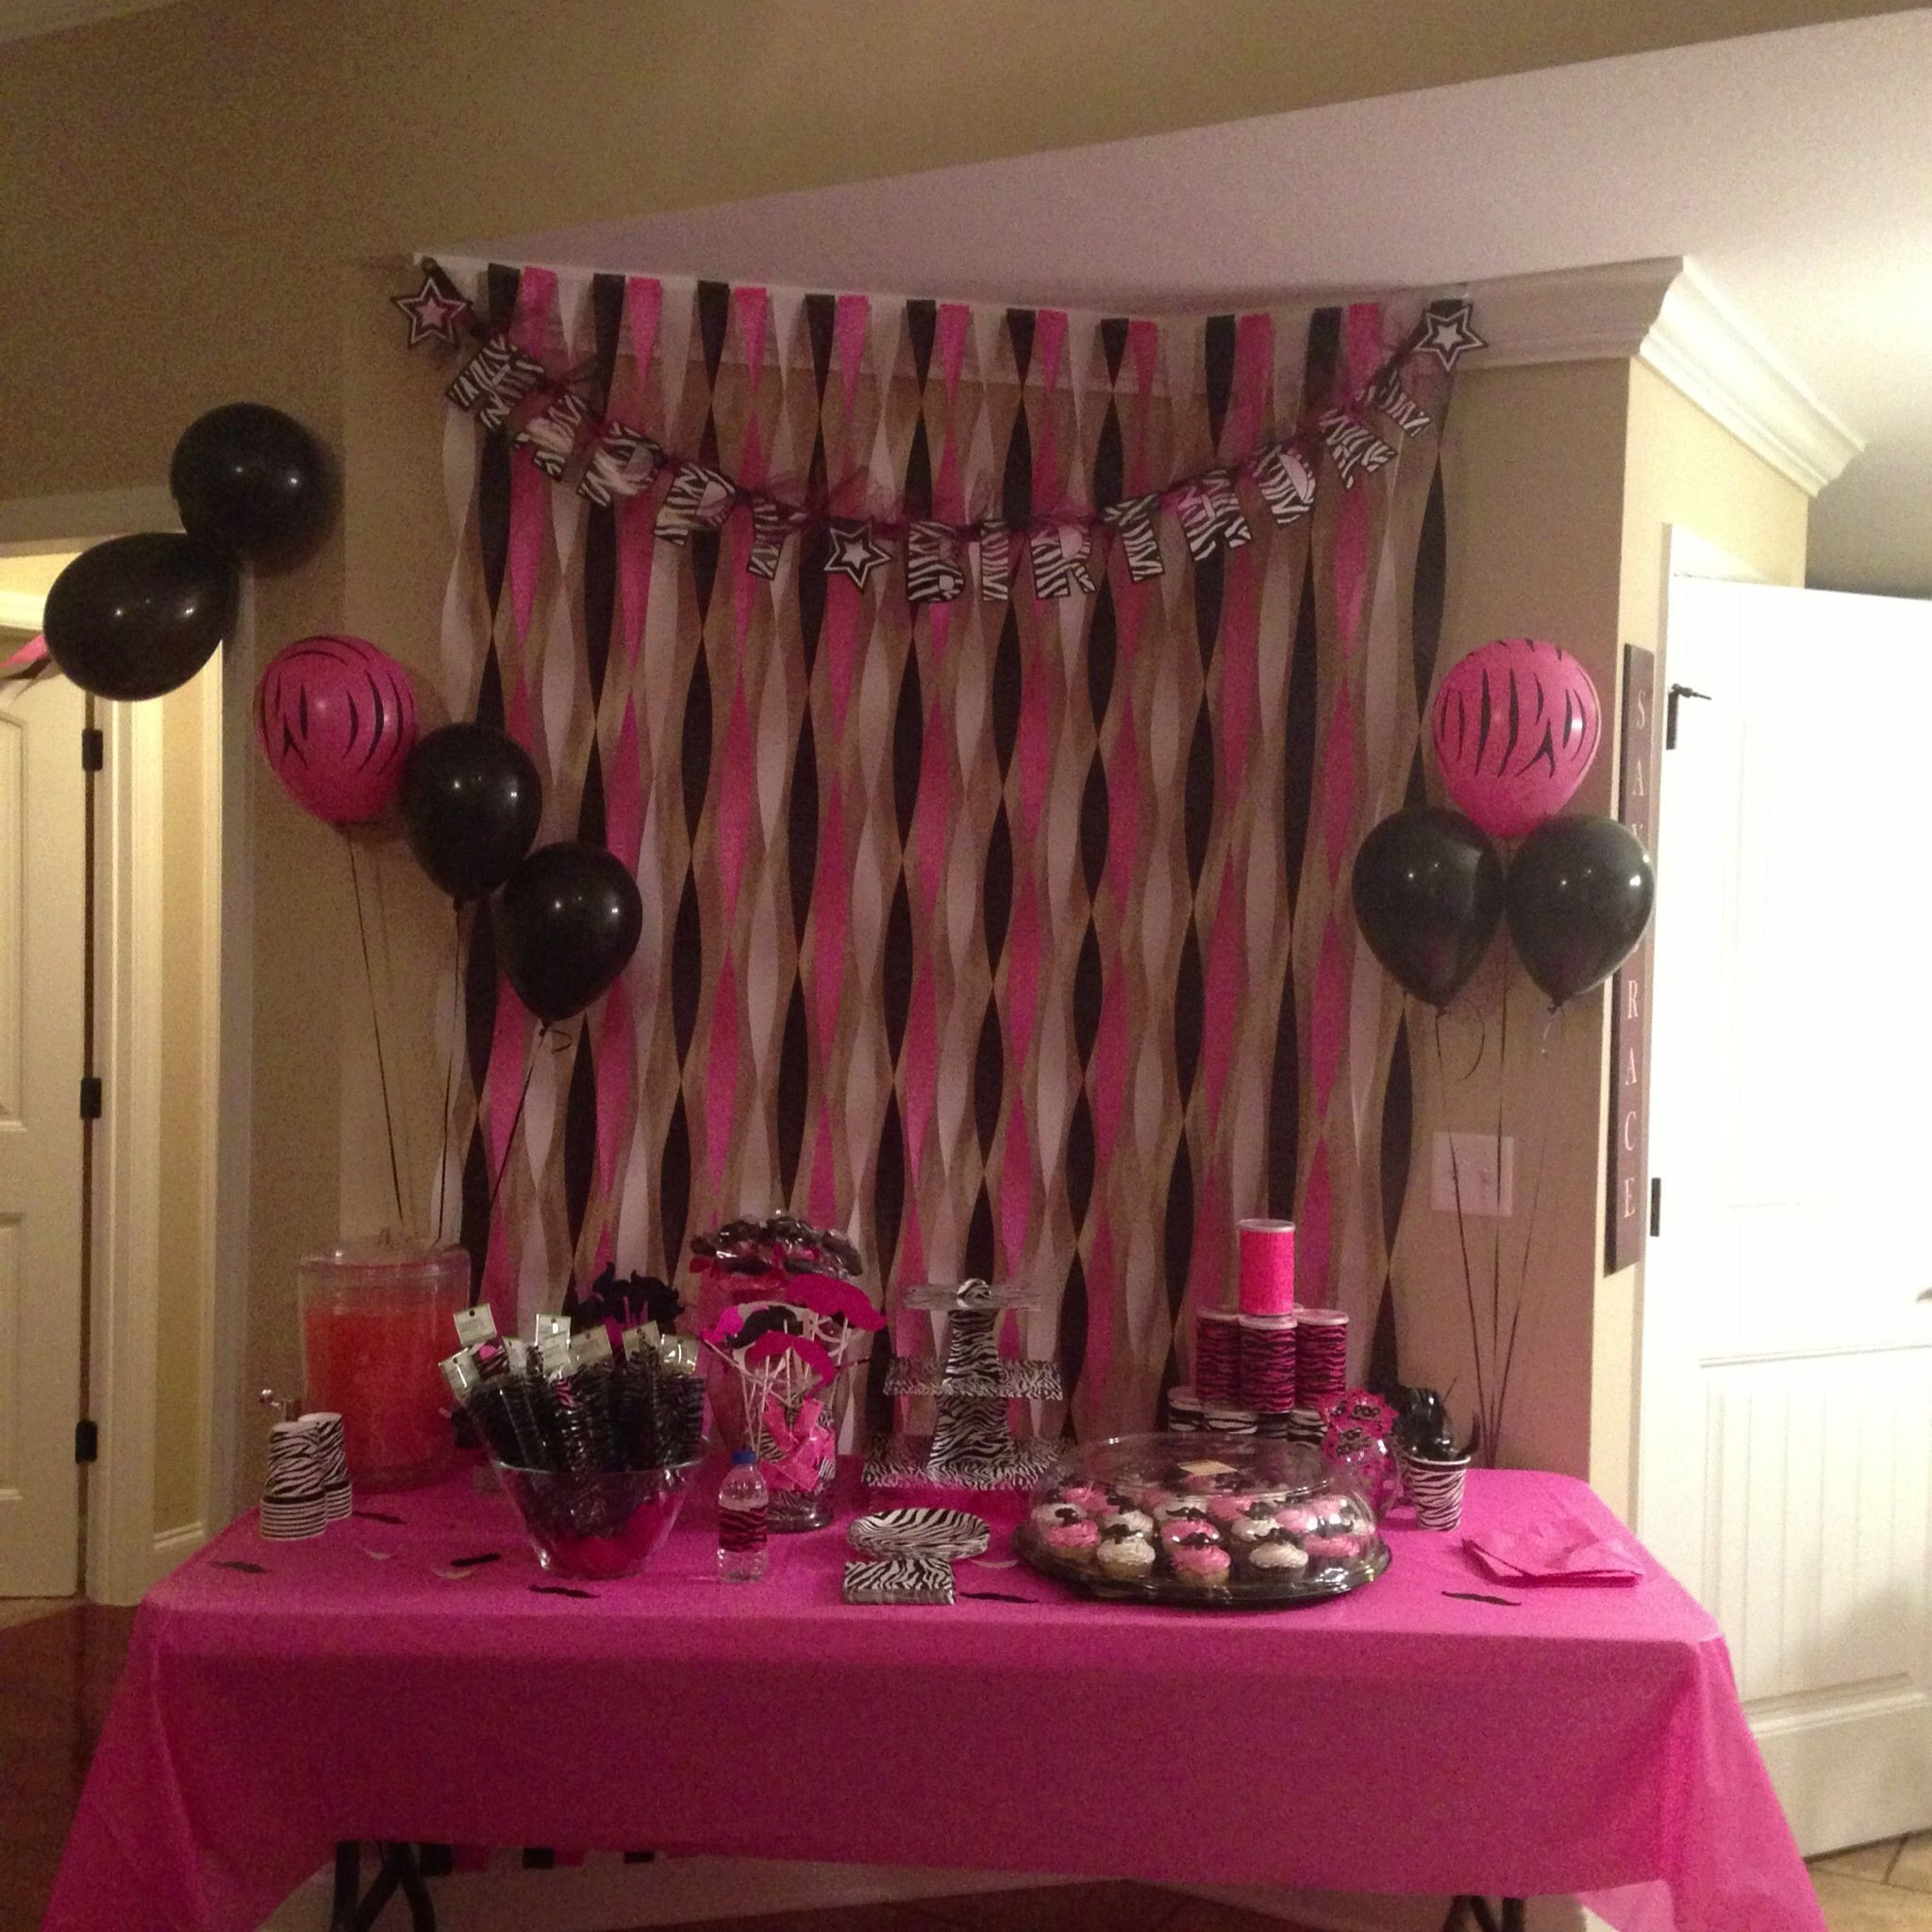 Zebra Print And Pink Birthday Party Ideas
 Pink and Zebra print Mustache Party